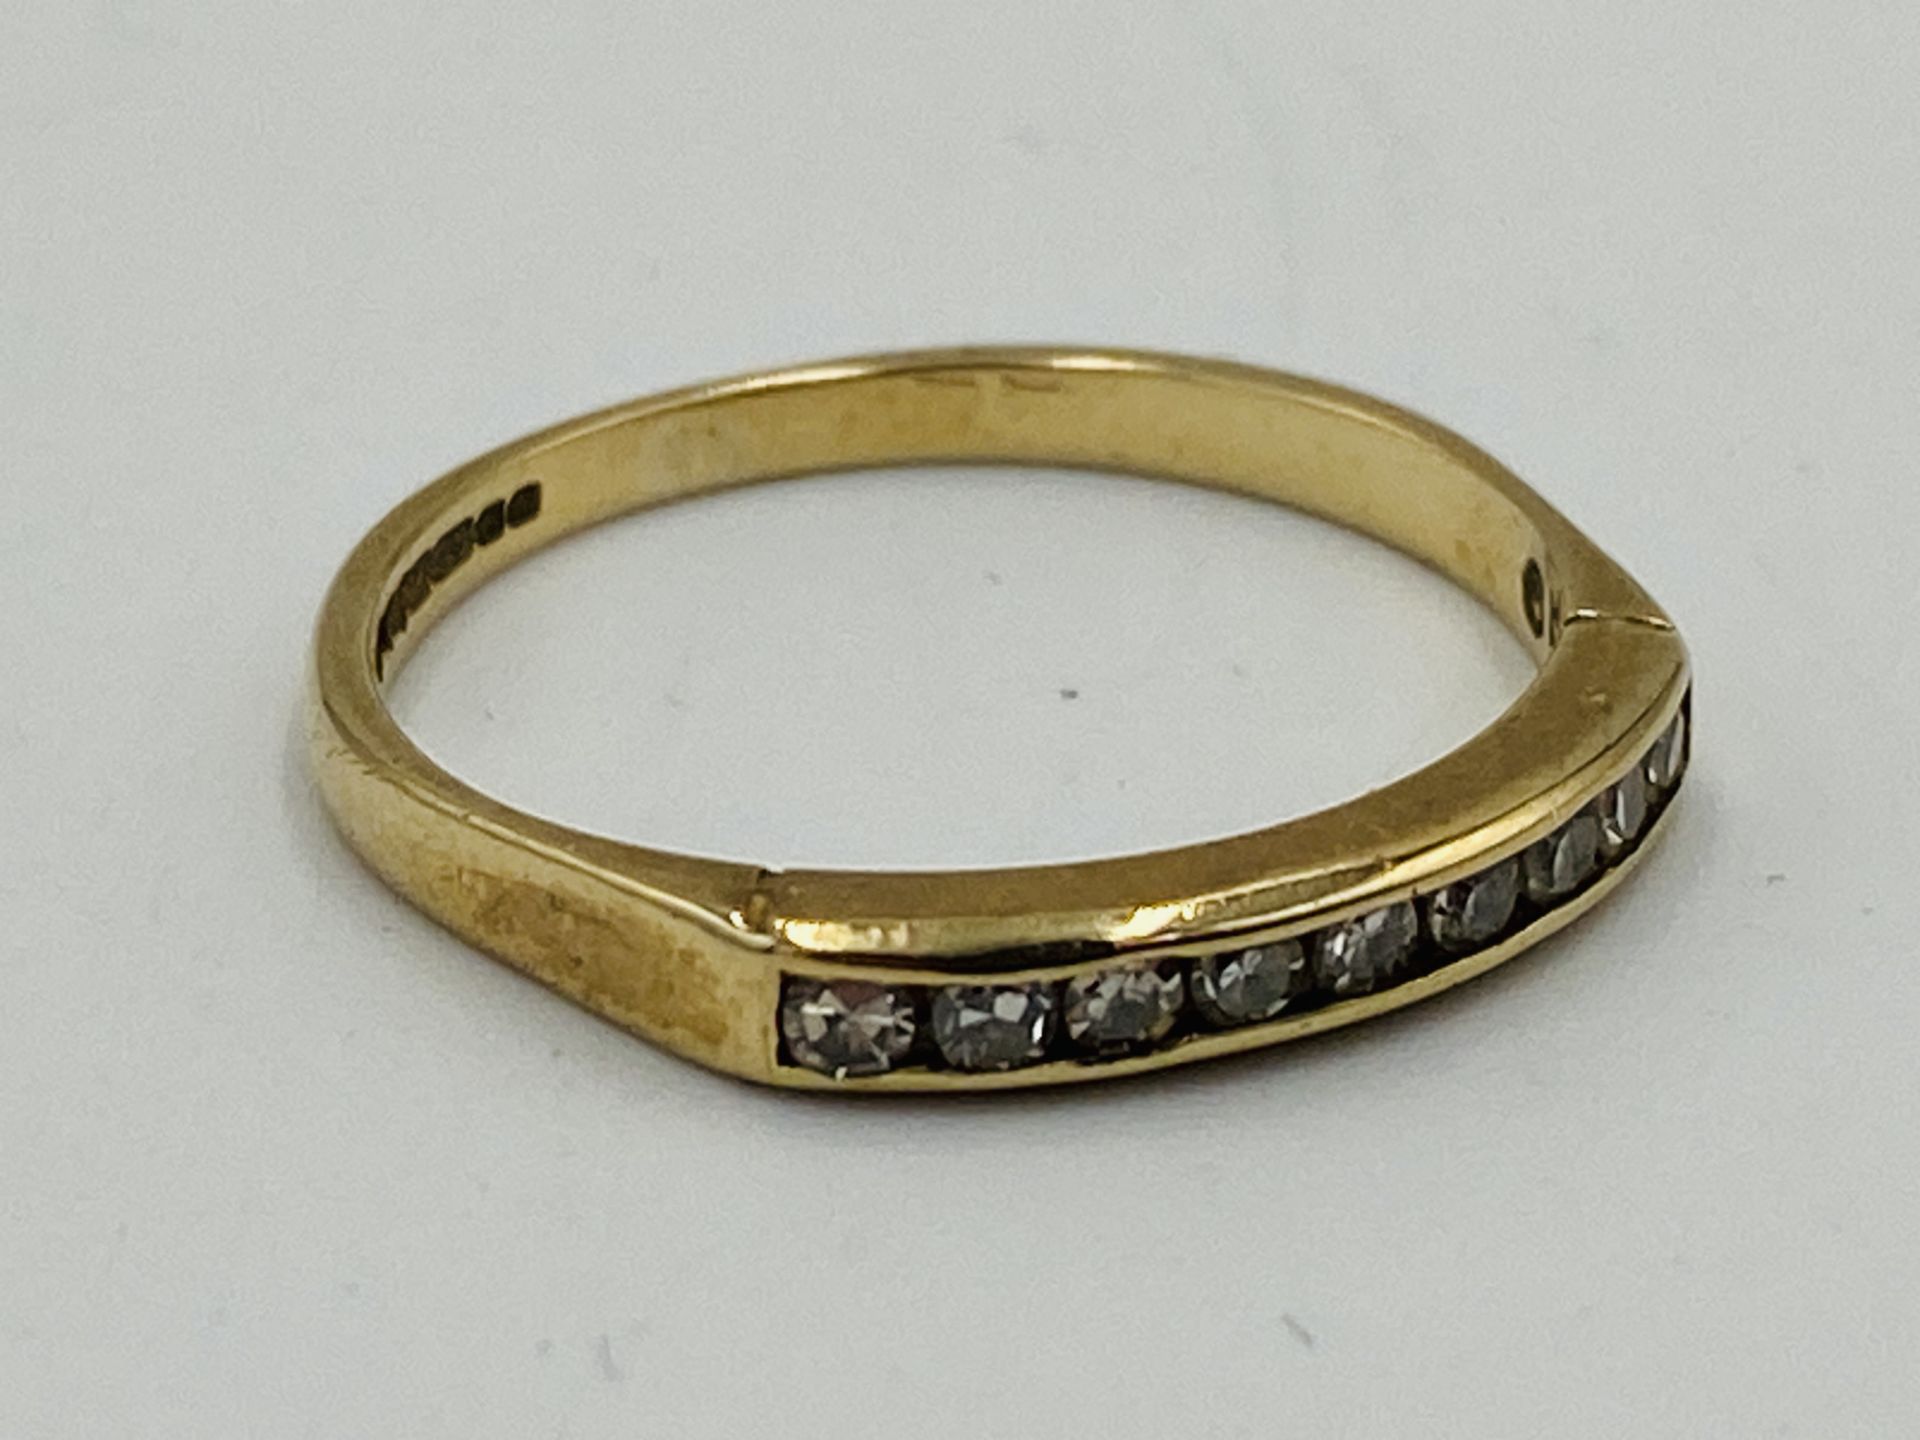 9ct gold and diamond ring - Image 3 of 3